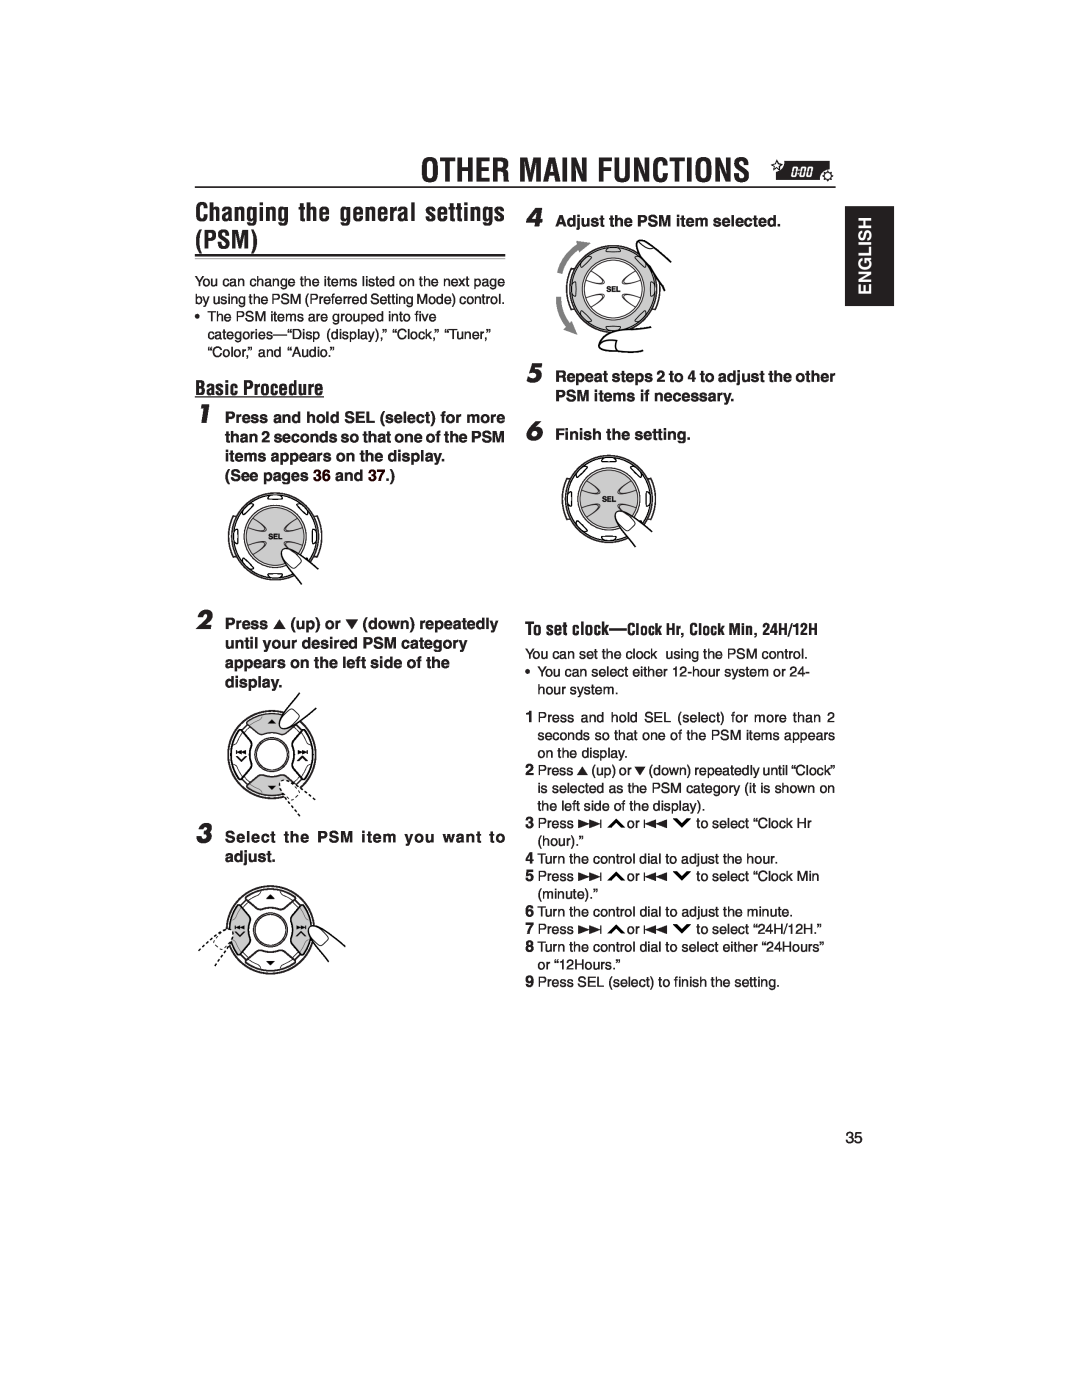 JVC KD-LH2000R manual Other Main Functions, Basic Procedure, English, See pages 36 and, Press 5 up or ∞ down repeatedly 